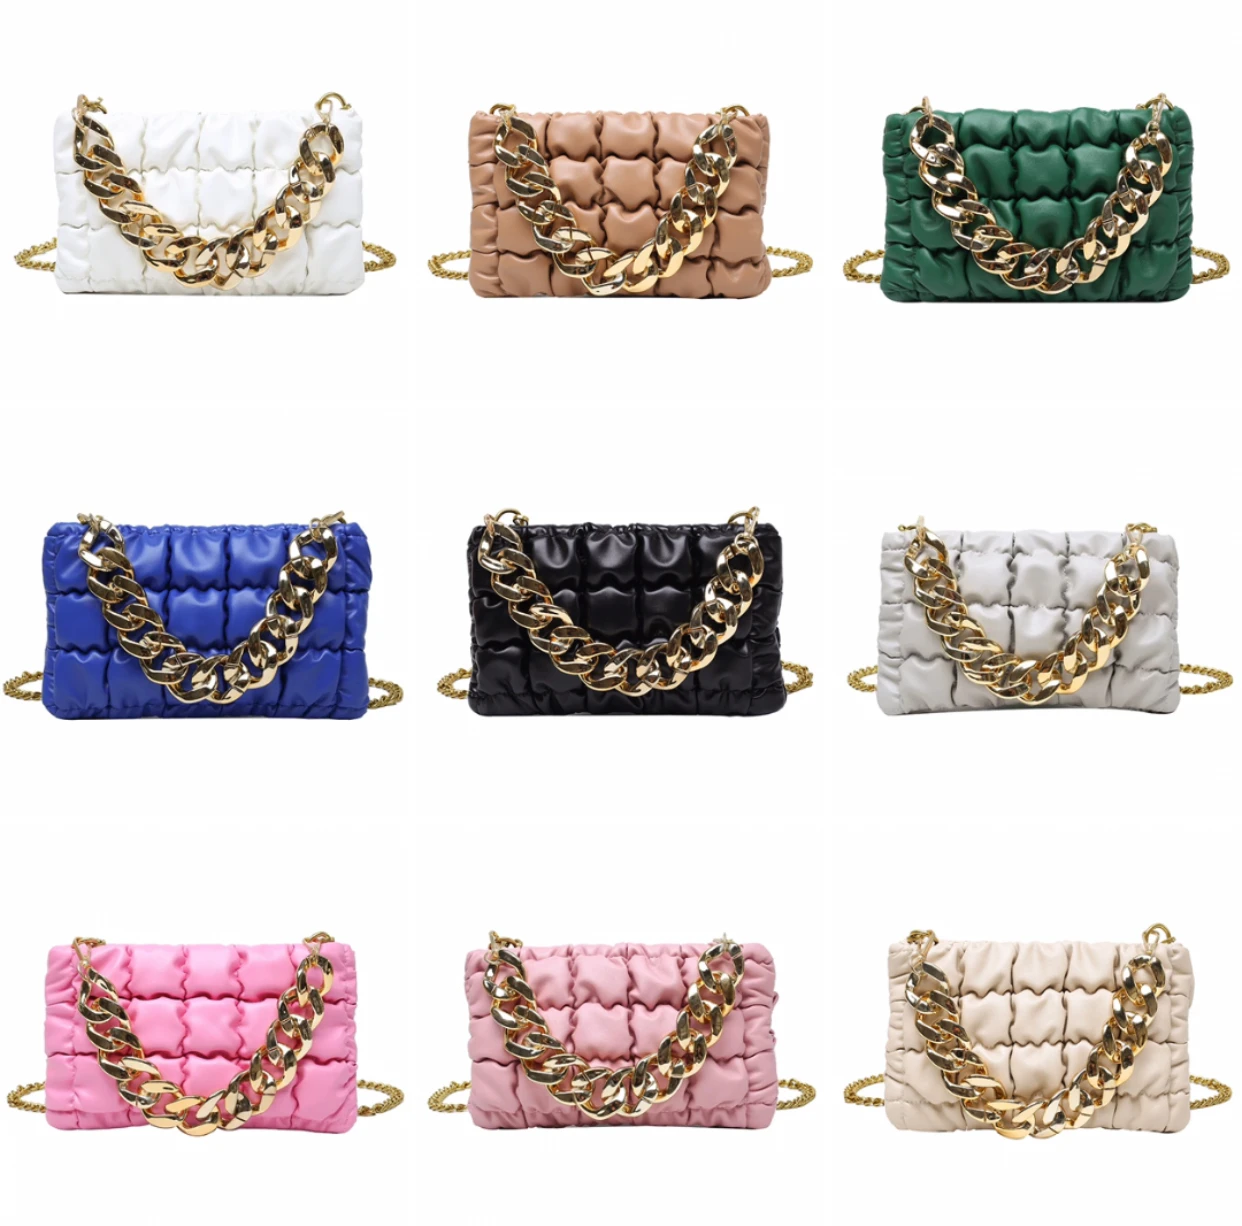 2022 Ladies Small Square Shoulder Bags Quilted PU Leather Handbags Women Hand Purses Girl Metal Chain fedora hats and purse